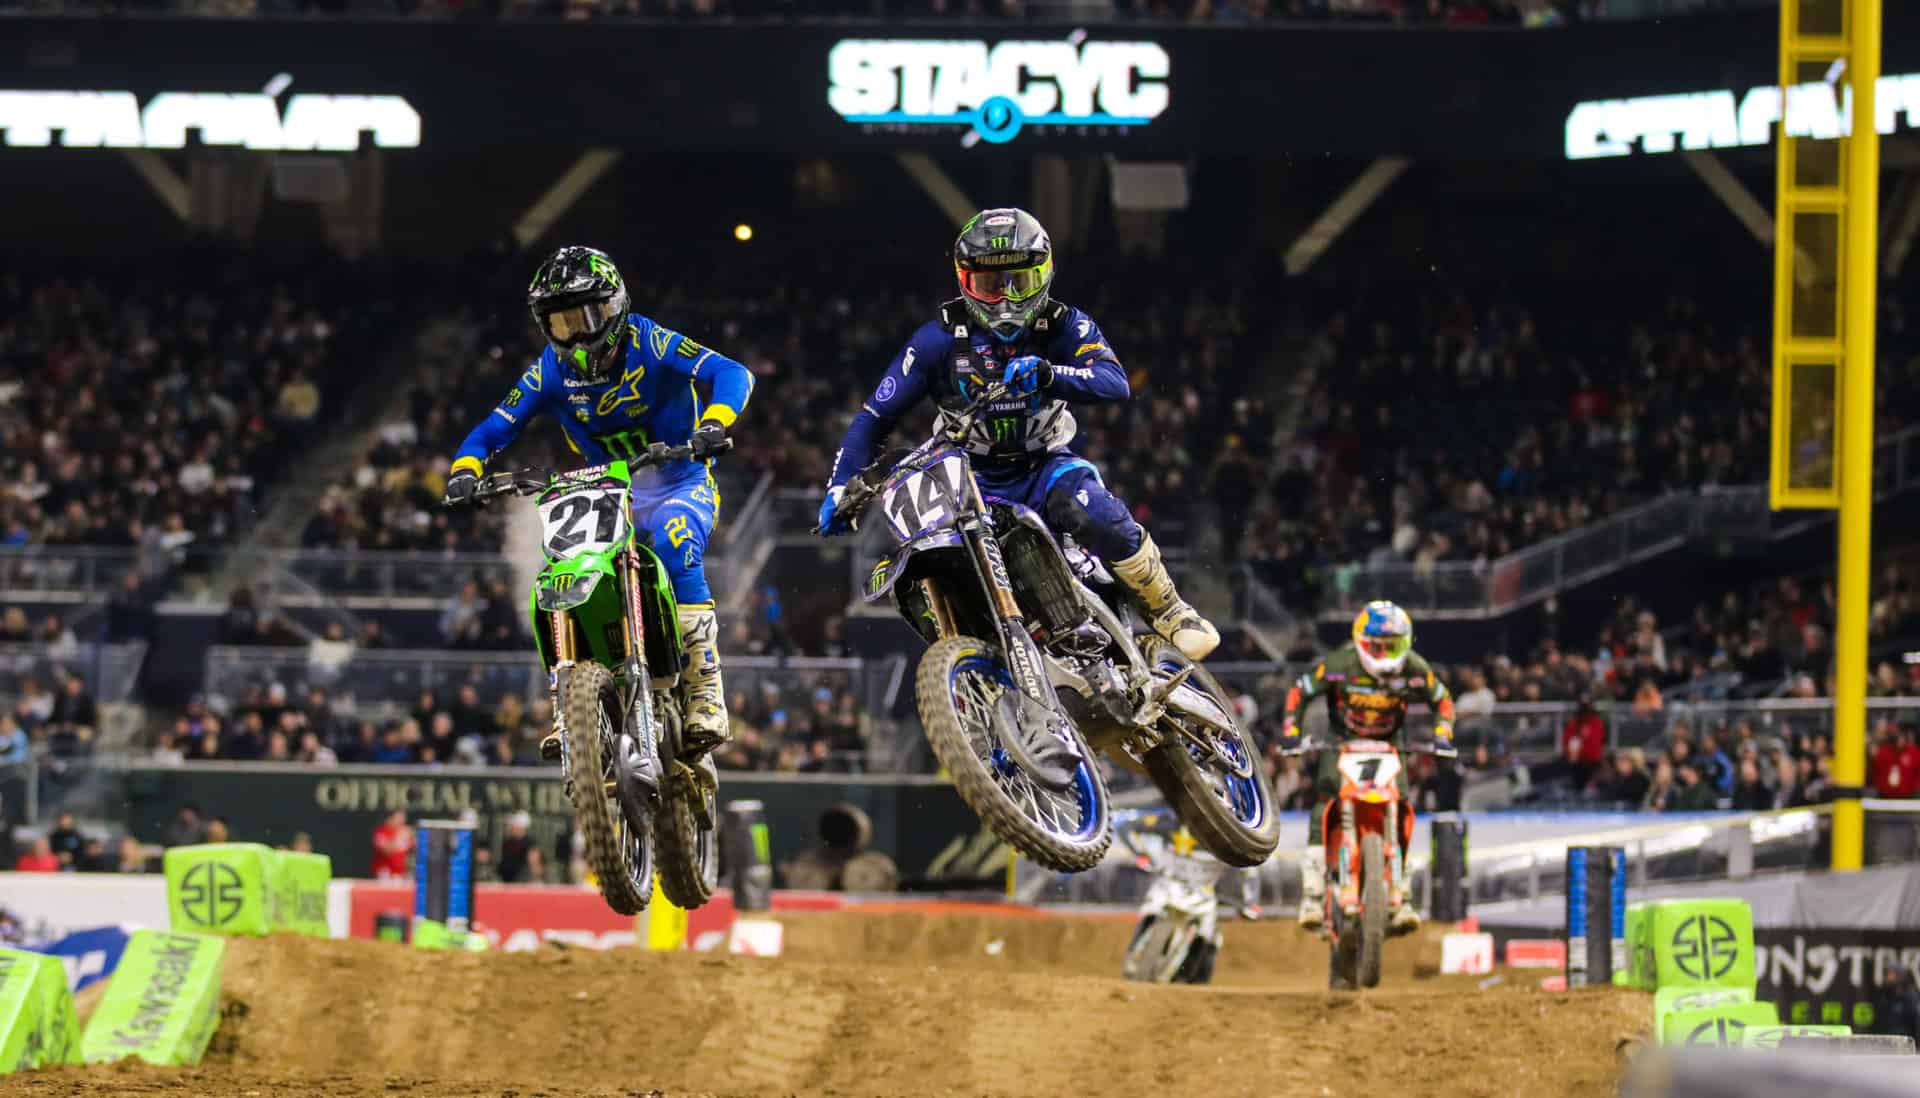 Dylan Ferrandis battles with Jason Anderson at San Diego Supercross in 2022. Photo by Rachel Schuoler with Kickin' the Tires.